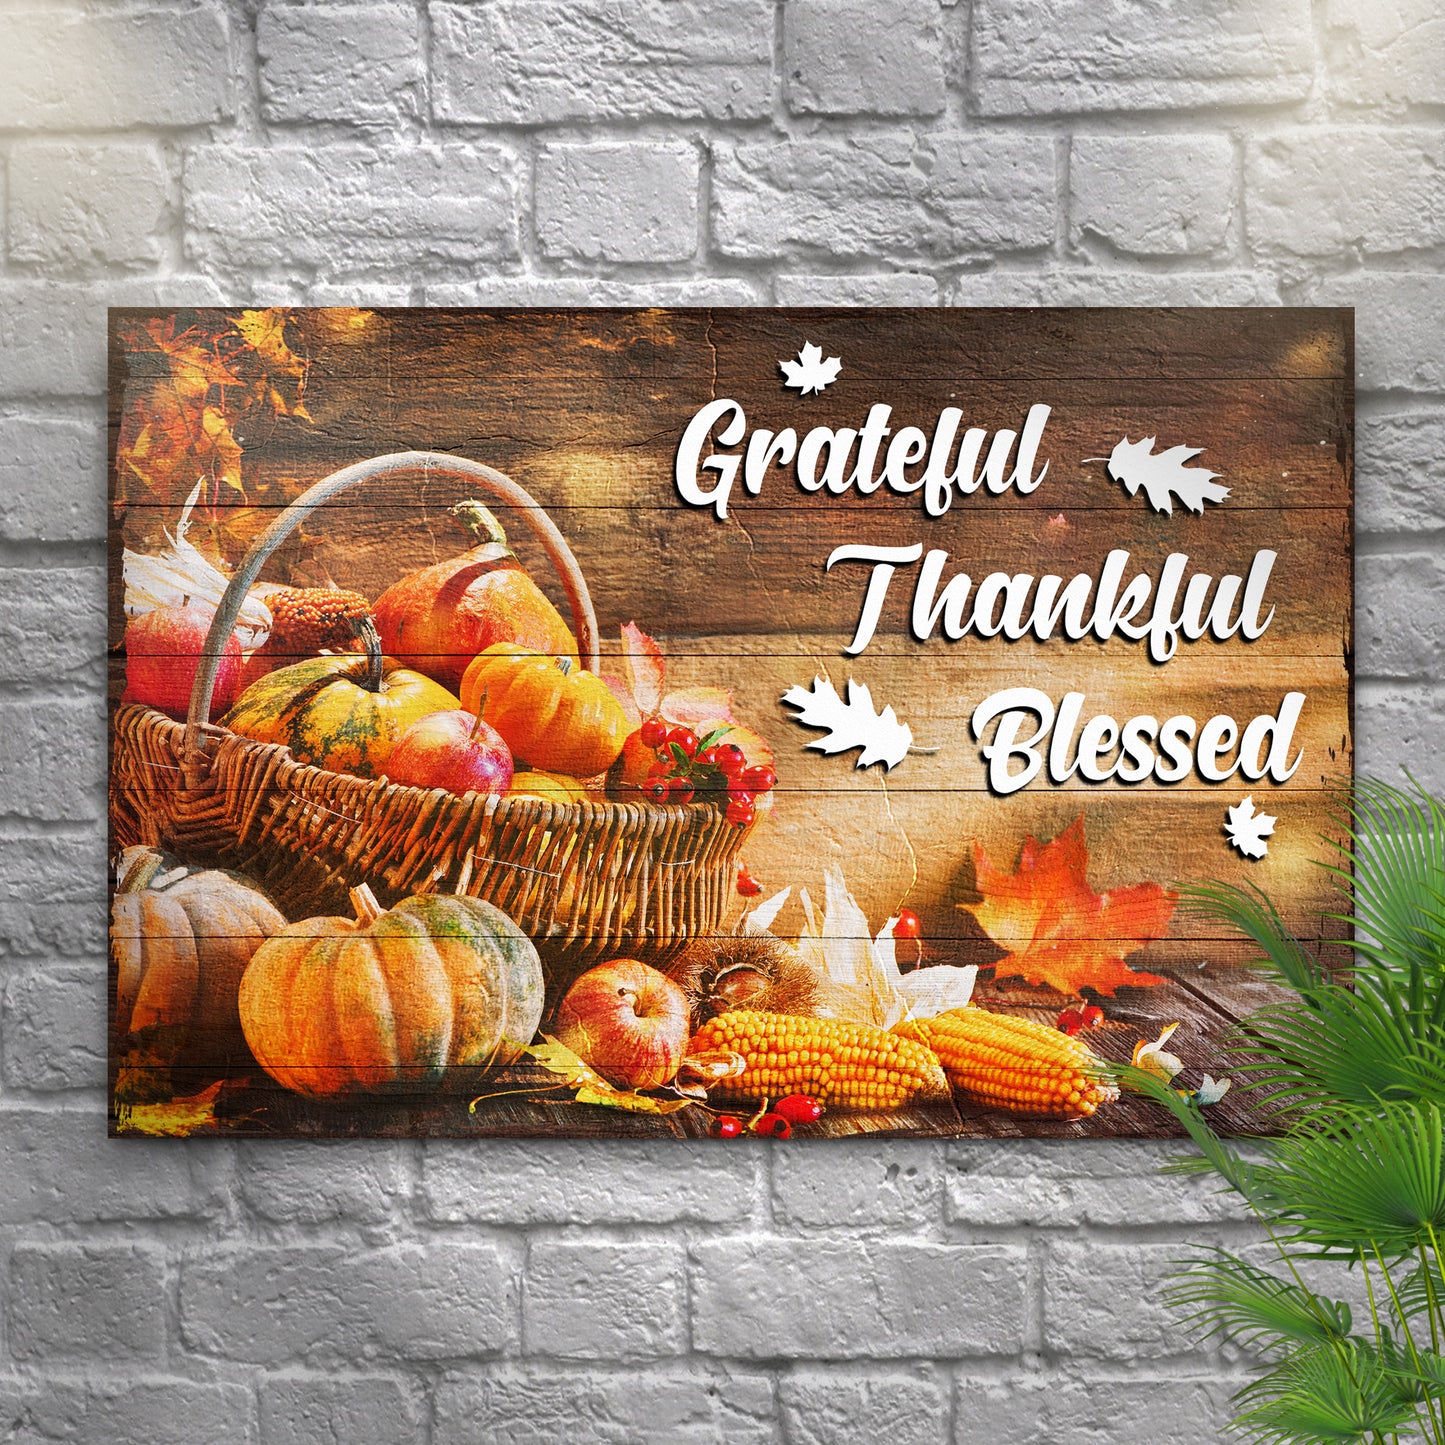 Grateful Thankful Blessed Sign II - Image by Tailored Canvases